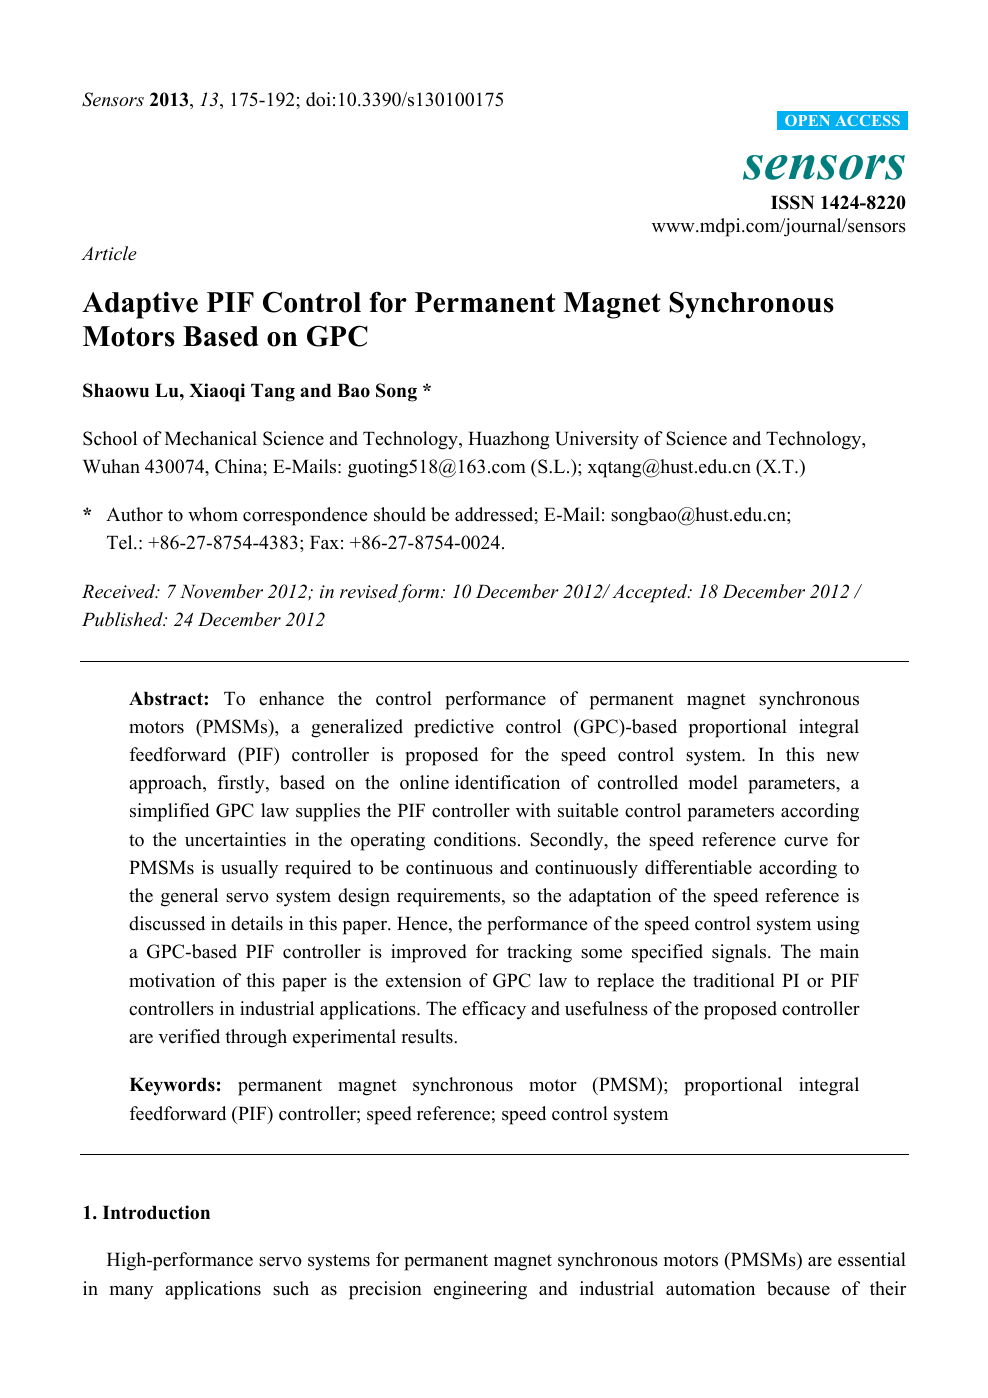 Adaptive Pif Control For Permanent Magnet Synchronous Motors Based On Gpc Topic Of Research Paper In Mechanical Engineering Download Scholarly Article Pdf And Read For Free On Cyberleninka Open Science Hub